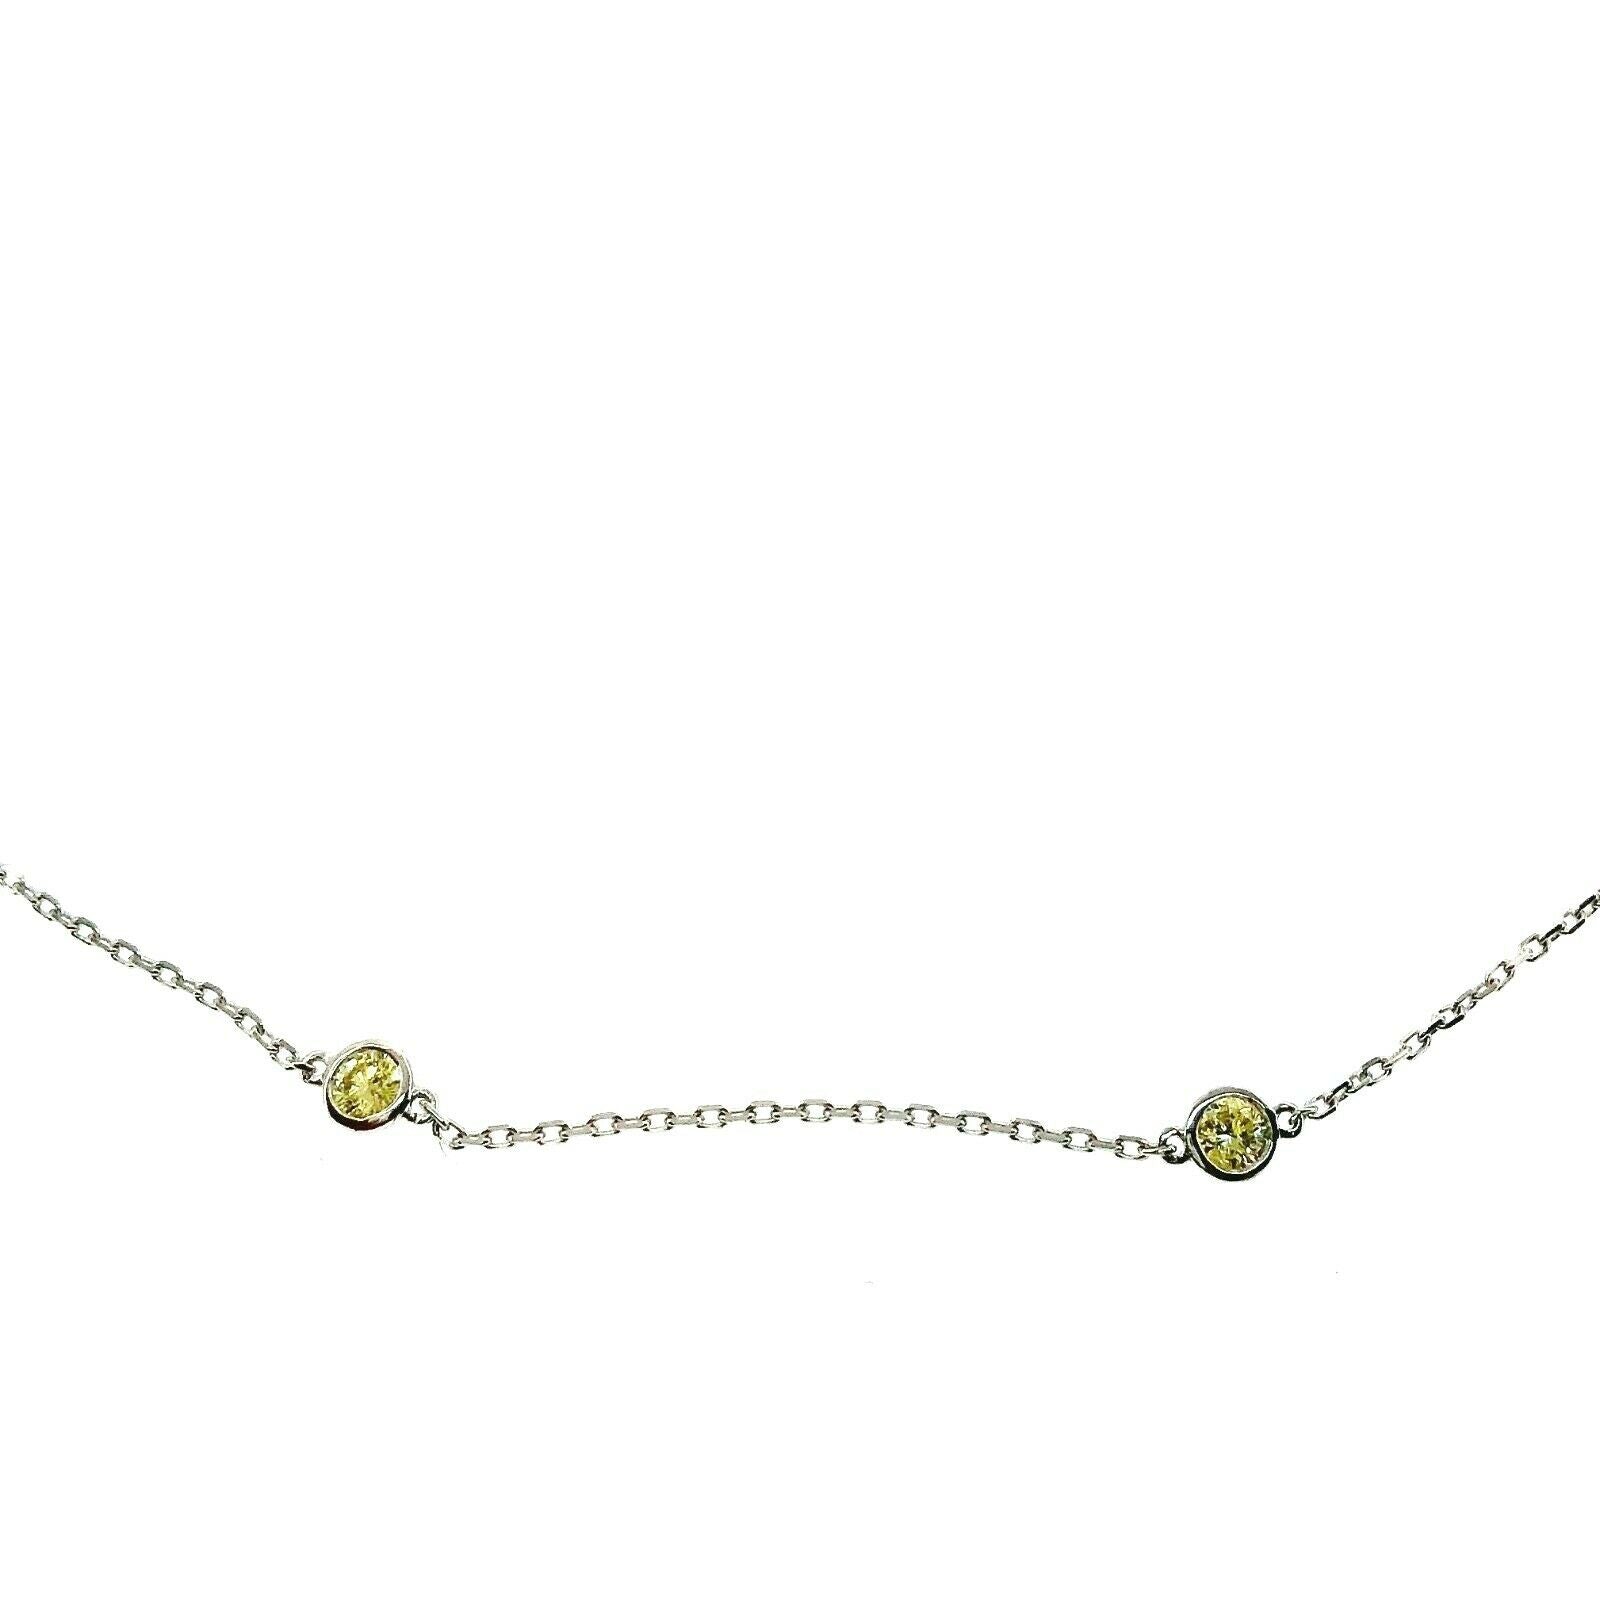 1.10 Carats Hand Assembled Fancy Yellow Diamond by The Yard Necklace Chain